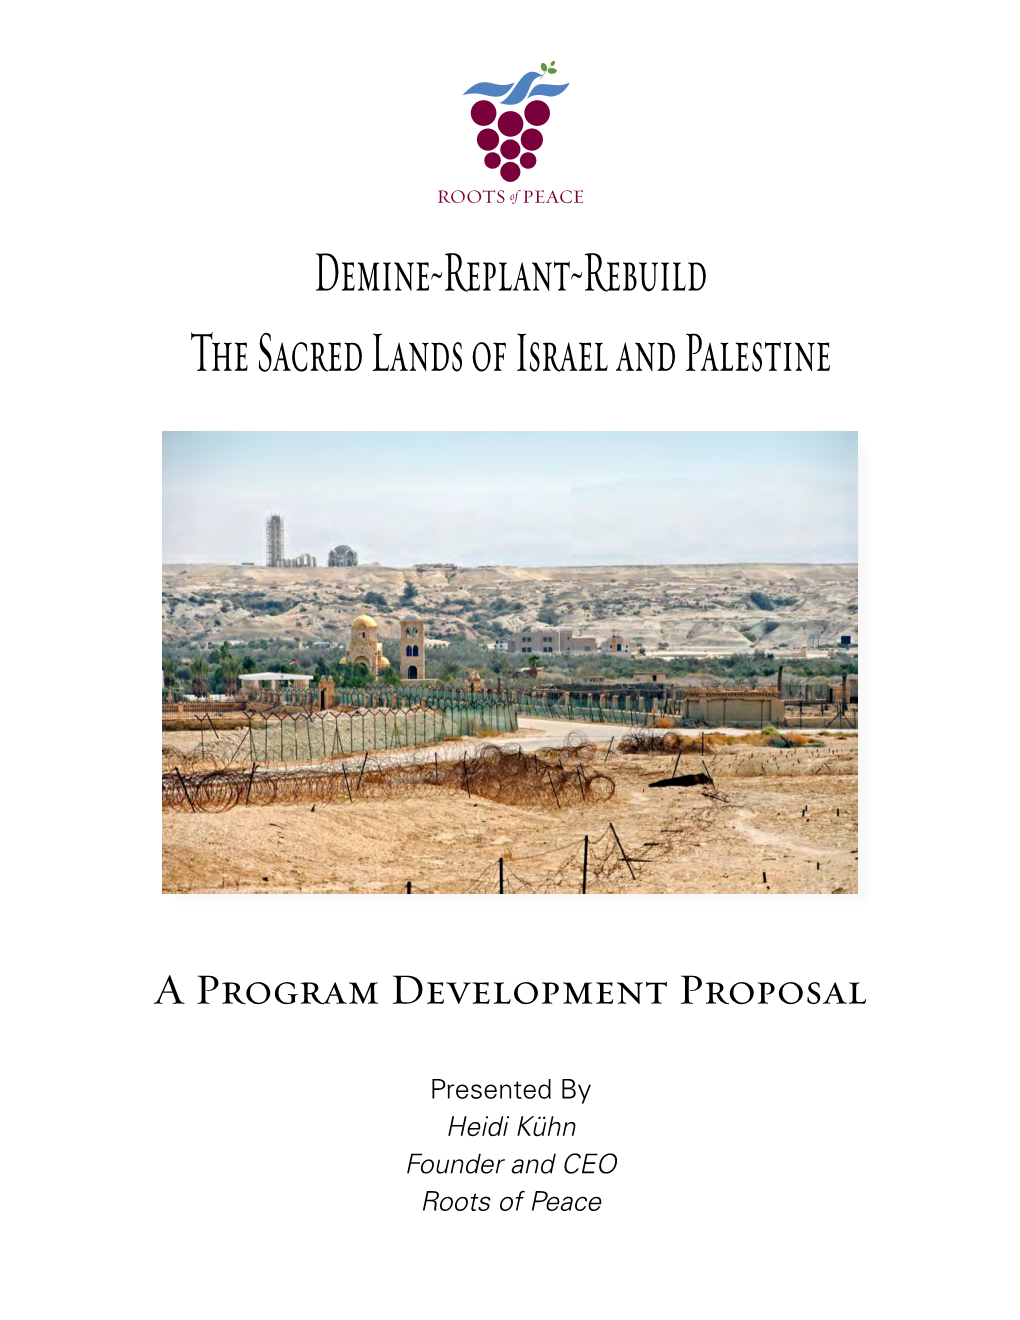 Demine~Replant~Rebuild the Sacred Lands of Israel and Palestine